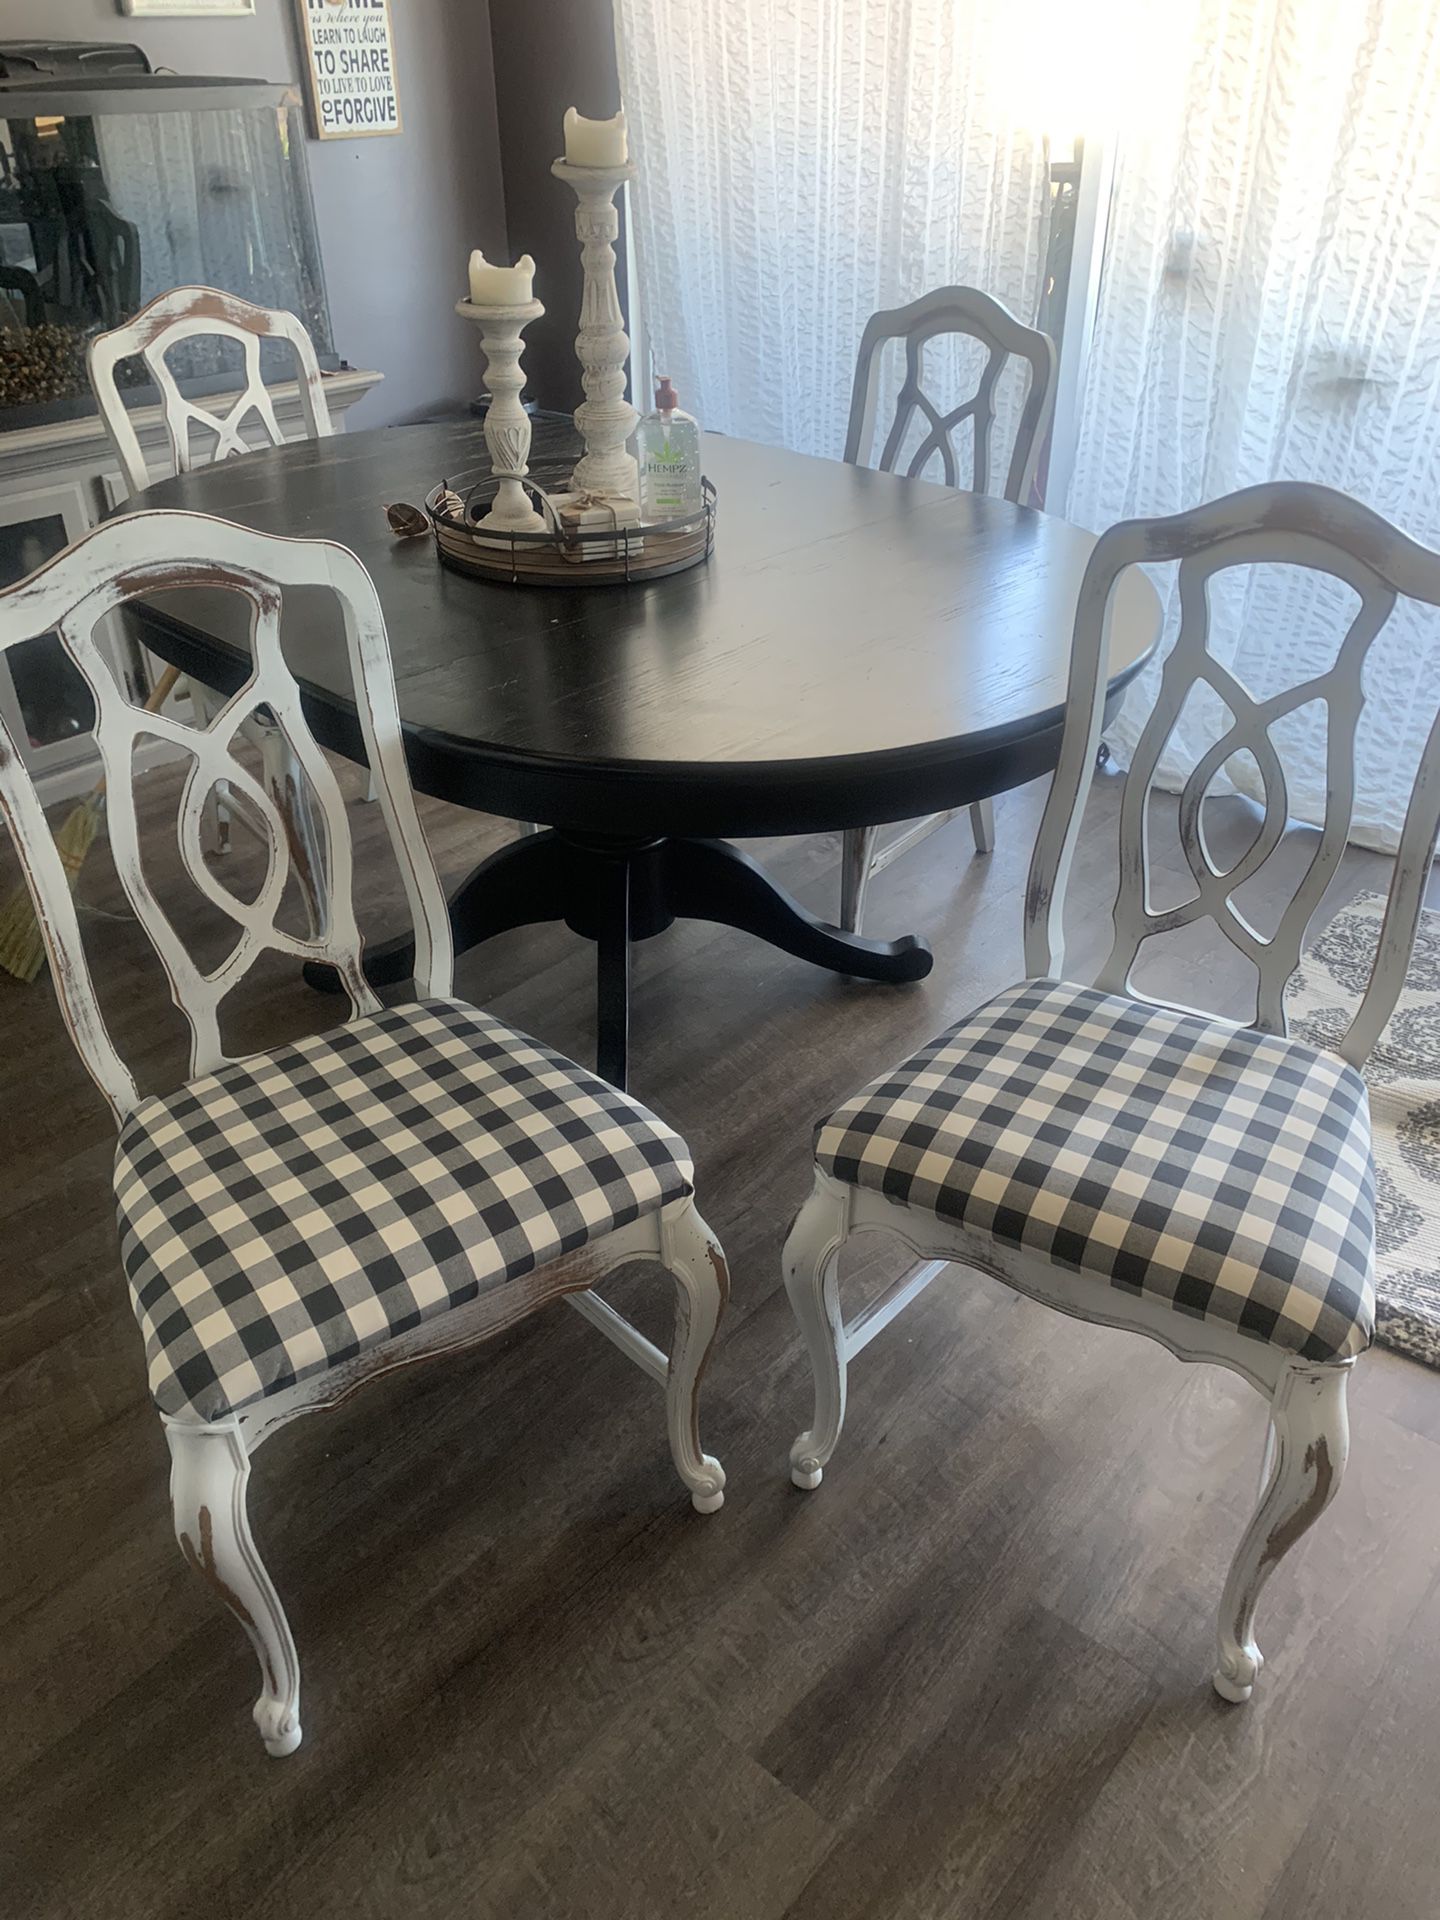 4 Dining room chairs - Farm House Style